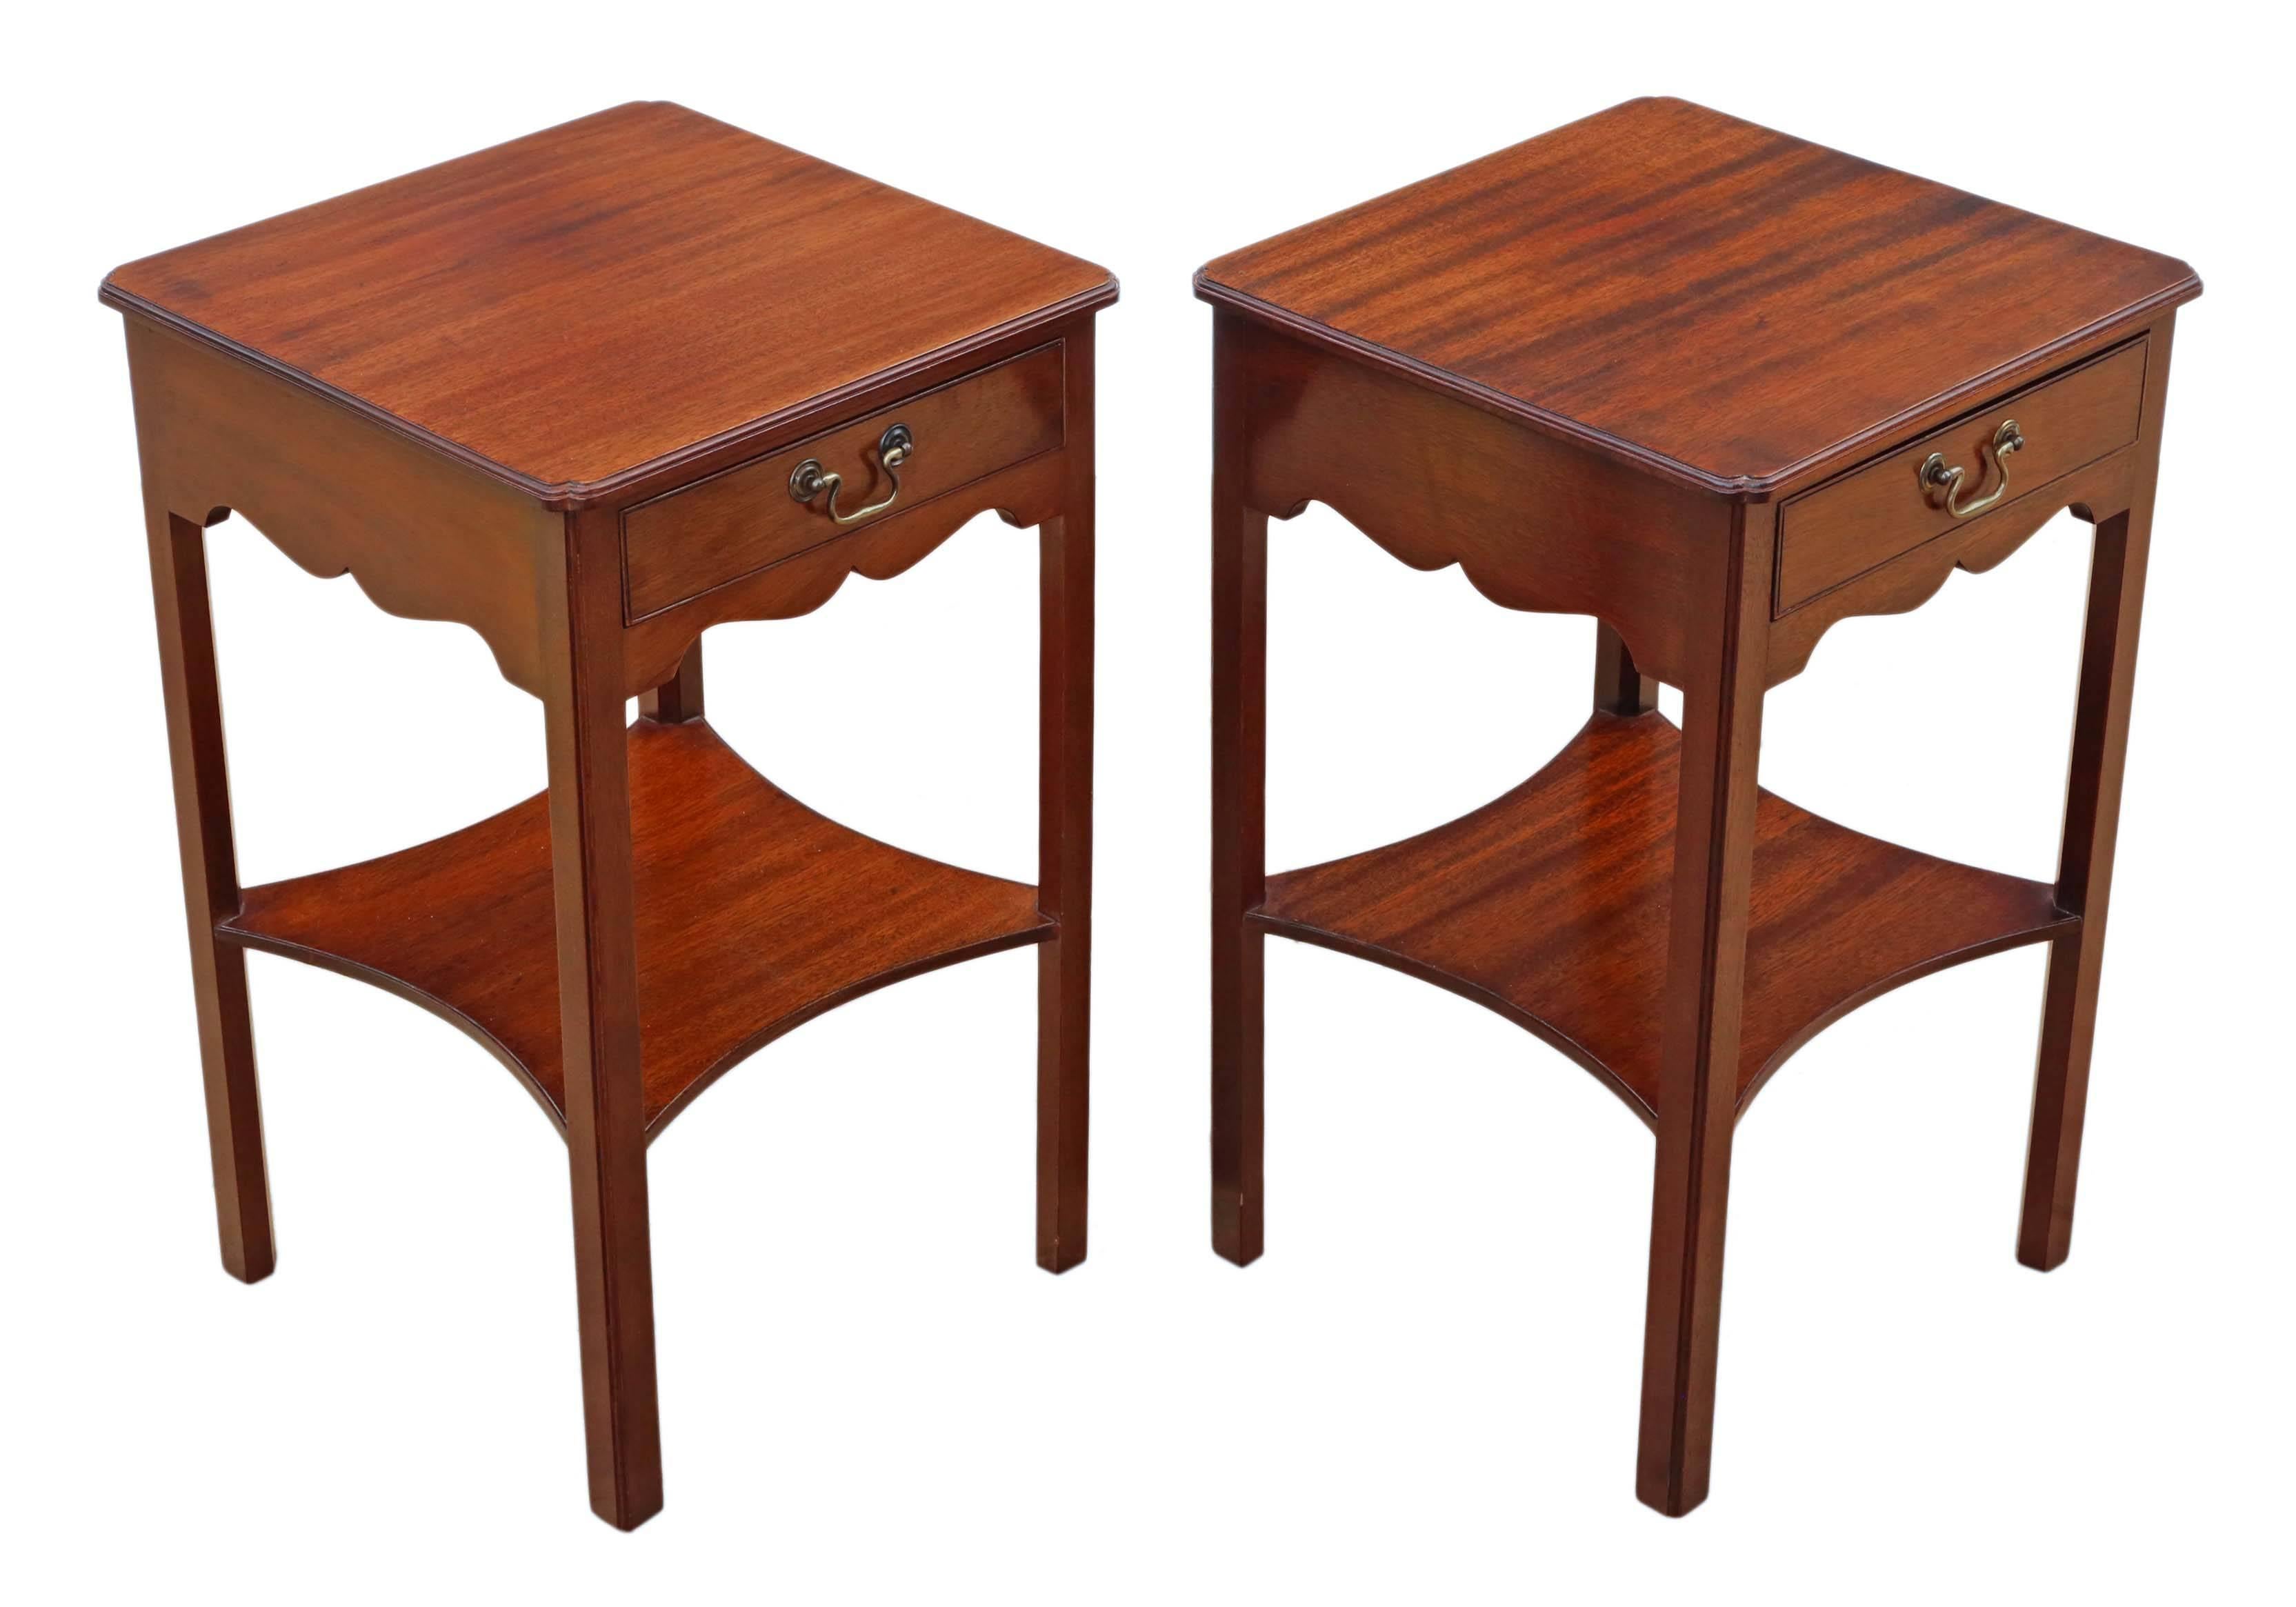 Antique Pair of Georgian Mahogany Bedside or Lamp Tables Redman and Hales In Good Condition For Sale In Wisbech, Walton Wisbech